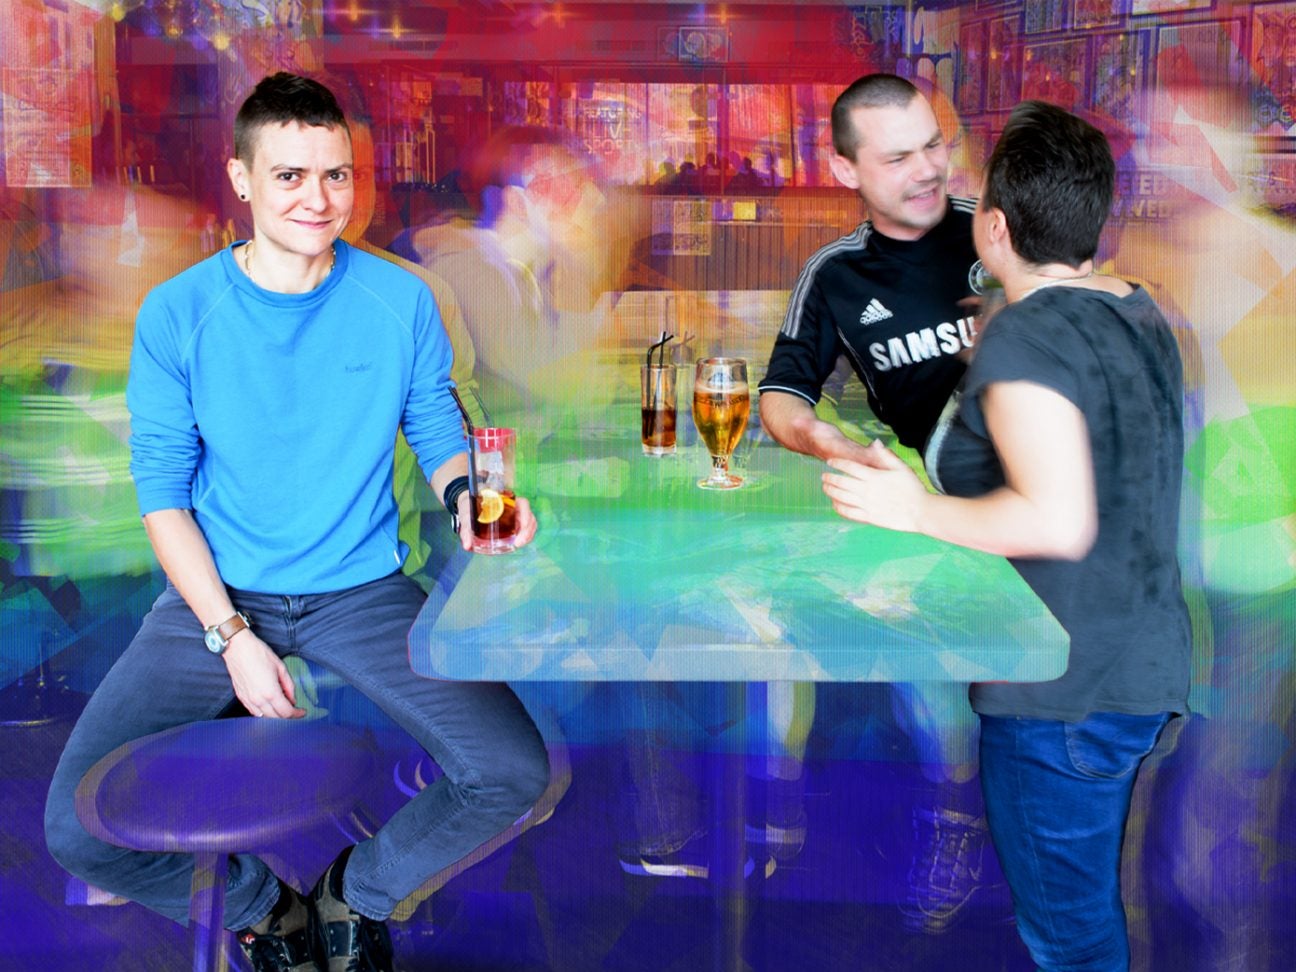 The 8 best LGBT weekends away in the UK